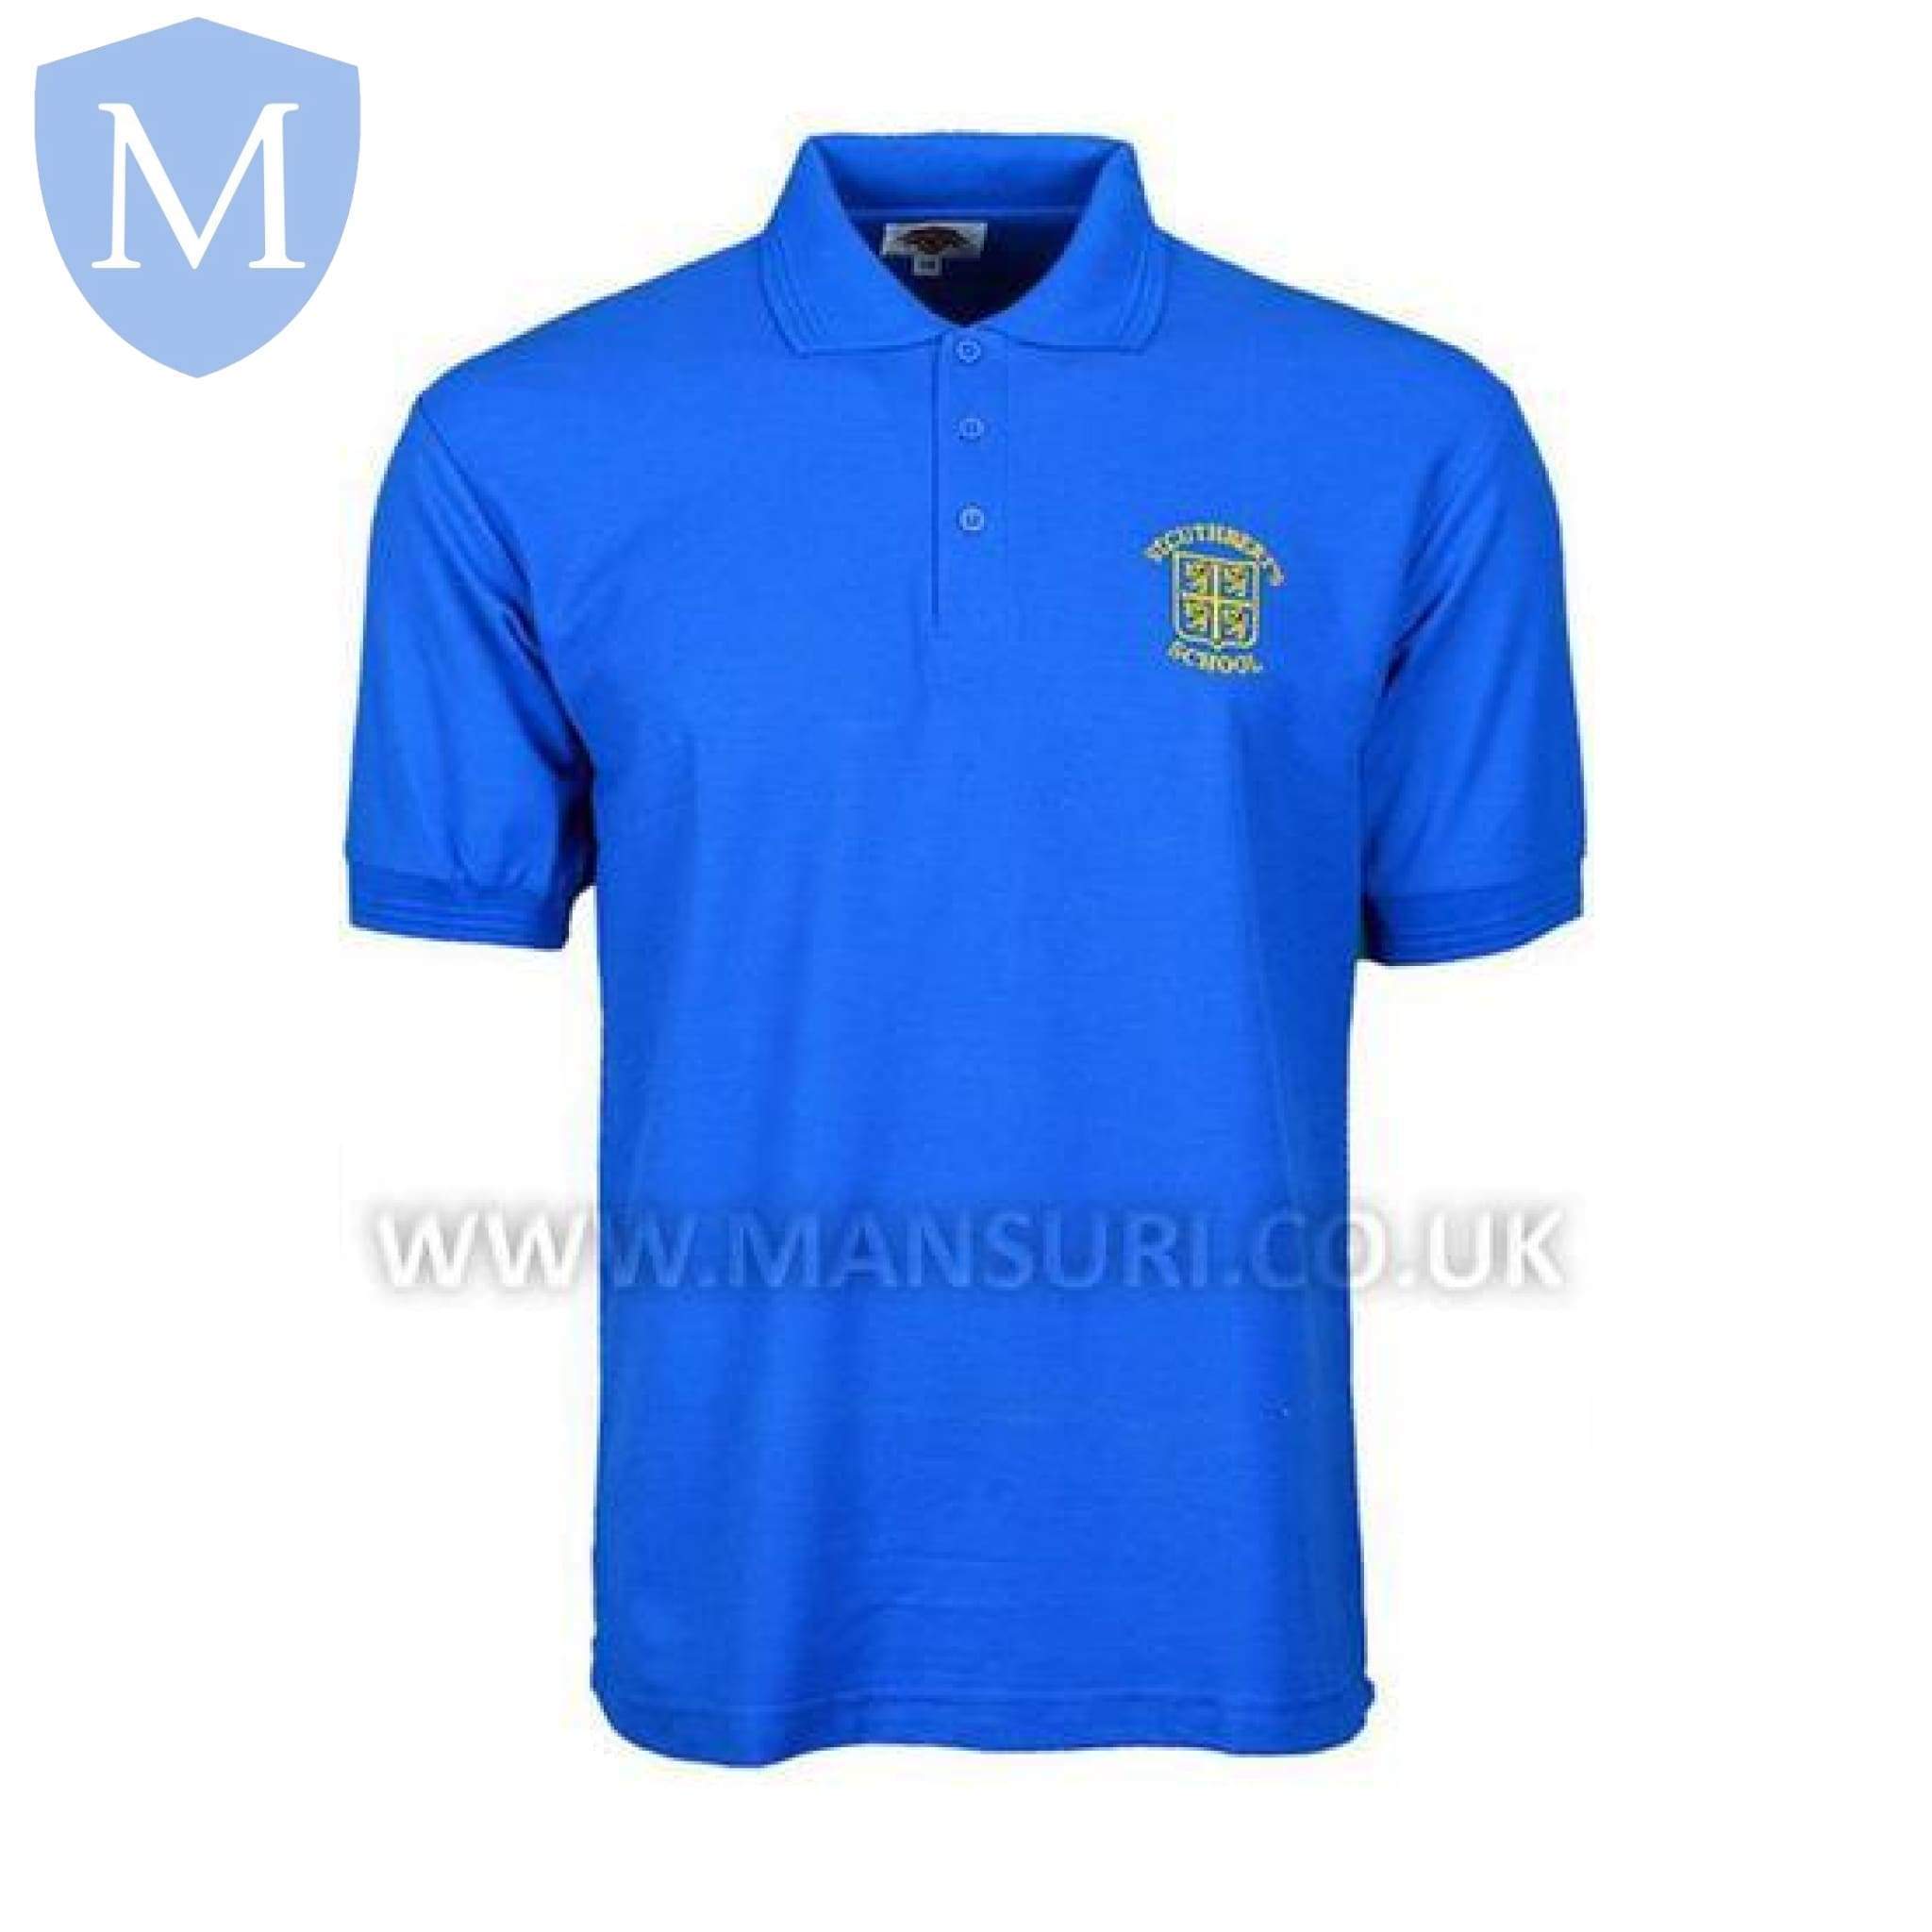 St Cuthberts Polo Shirts Size. 22 - 2 Years,36 Small,38 Medium,40 Large,42 X-Large,Size. 24 - 3-4 Years,Size. 26 - 5-6 Years,Size. 28 - 7-8 Years,Size. 30 - 9-10 Years,Size. 32 - 11-12 Years,Size. 34 - 12-13 Years